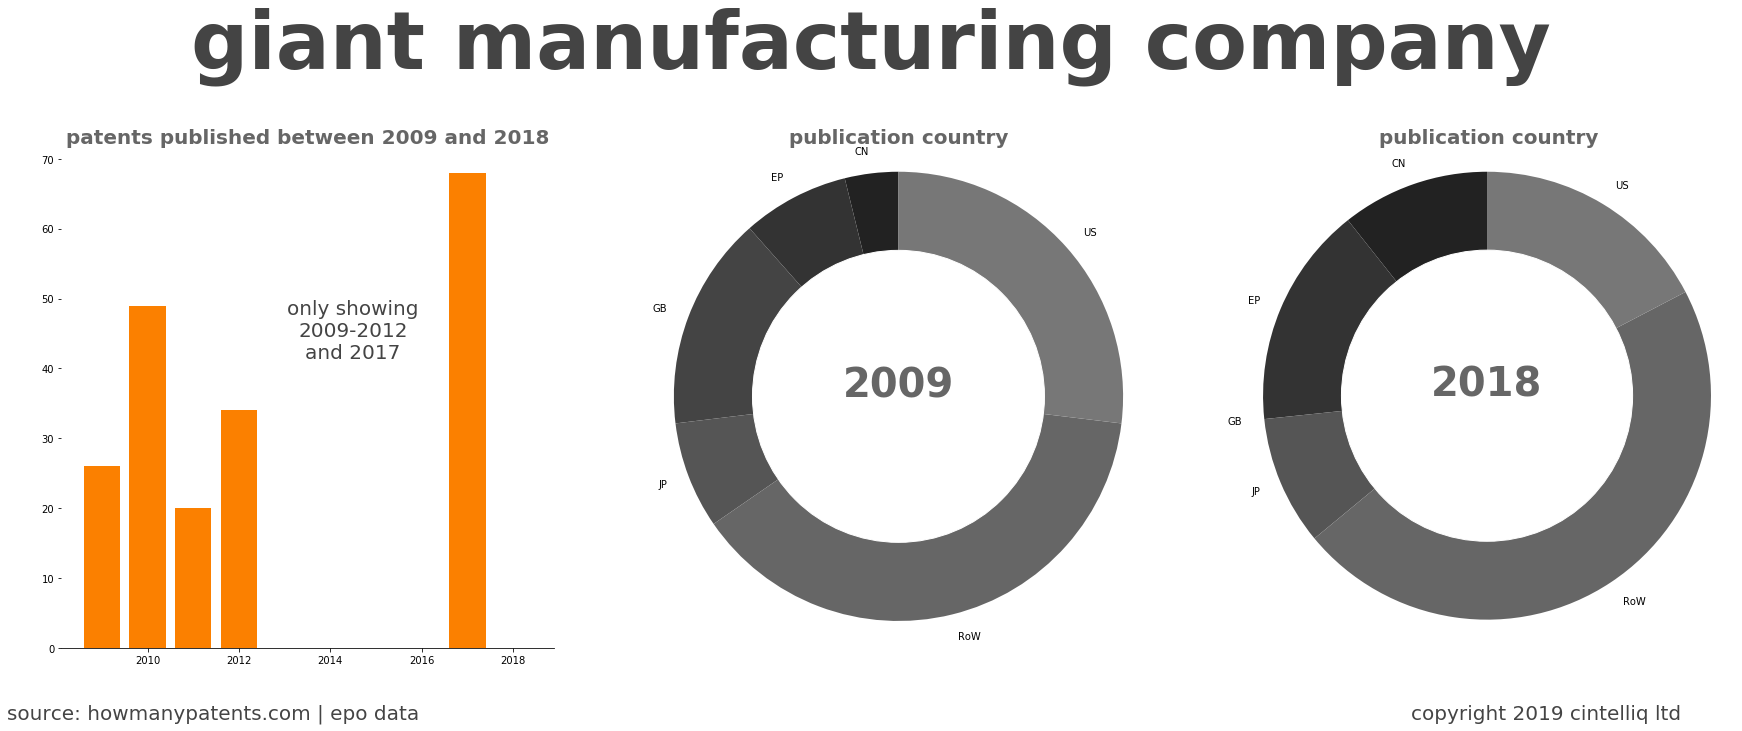 summary of patents for Giant Manufacturing Company